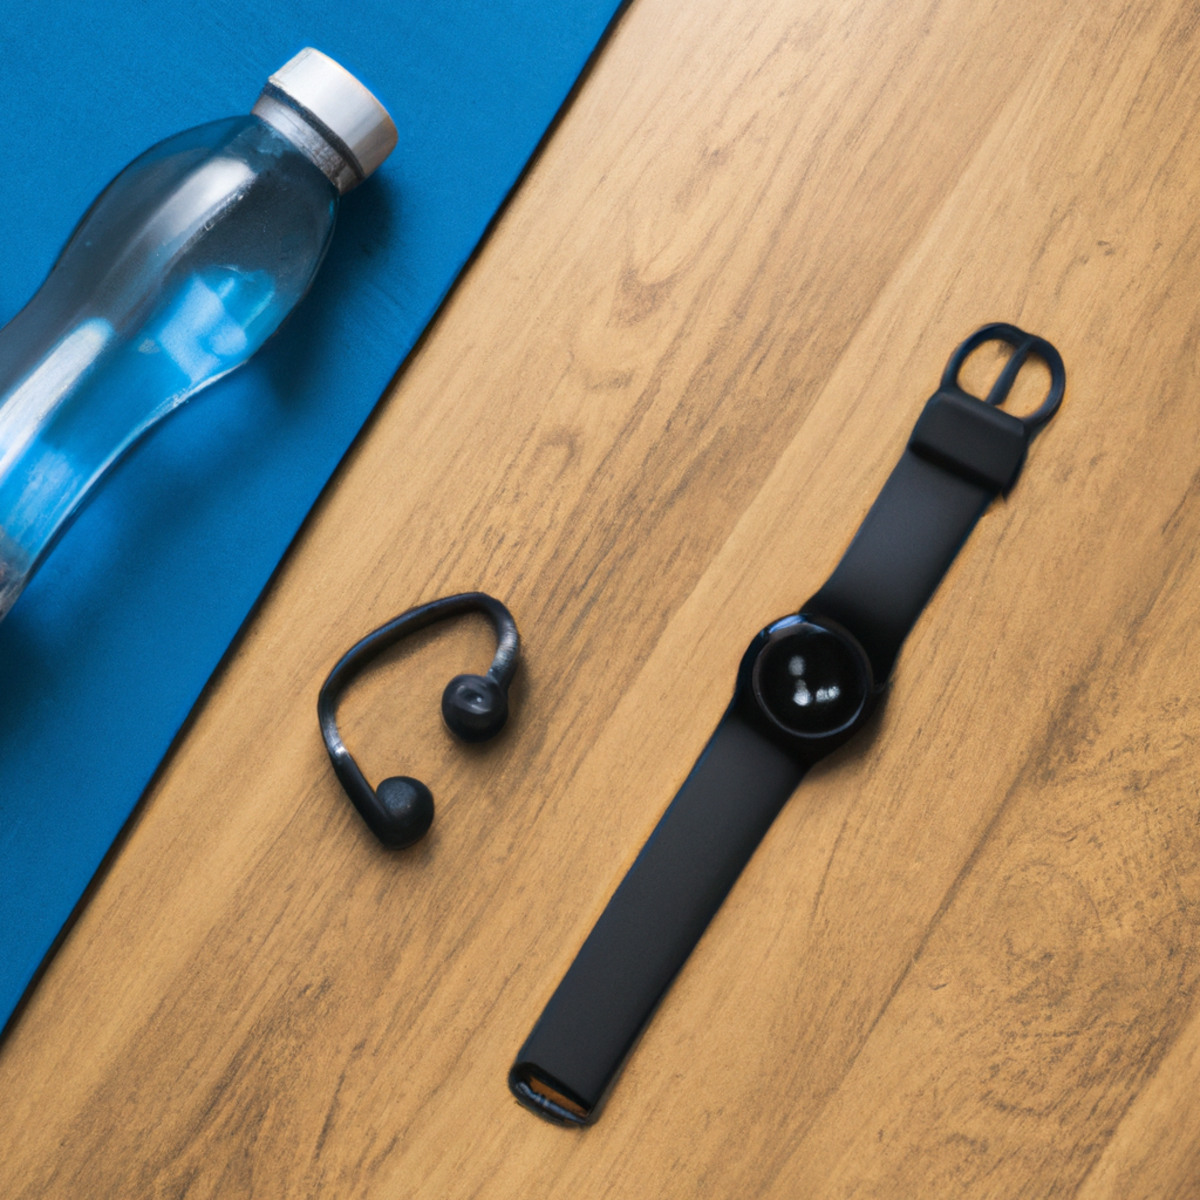 The photo features a sleek Fitness Apps and Wearables fitness tracker watch, a pair of wireless earbuds, a water bottle, and a yoga mat neatly arranged on a wooden floor. The fitness tracker watch displays the user's heart rate and step count, while the earbuds are ready to provide a motivating soundtrack for a workout. The water bottle is filled with refreshing water, encouraging hydration during exercise, and the yoga mat is rolled up and ready for a calming yoga session. The photo captures the essence of a healthy and active lifestyle, showcasing the essential tools needed to achieve fitness goals.